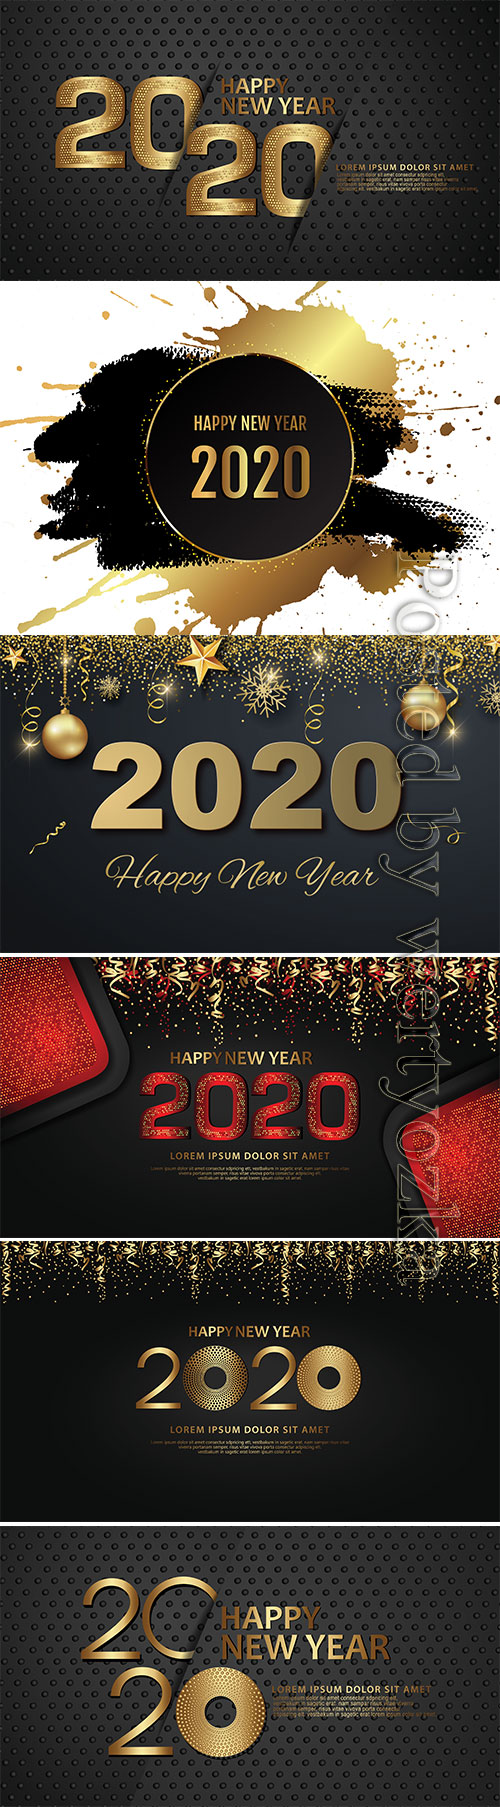 Gold Happy New Year vector background with snowflake